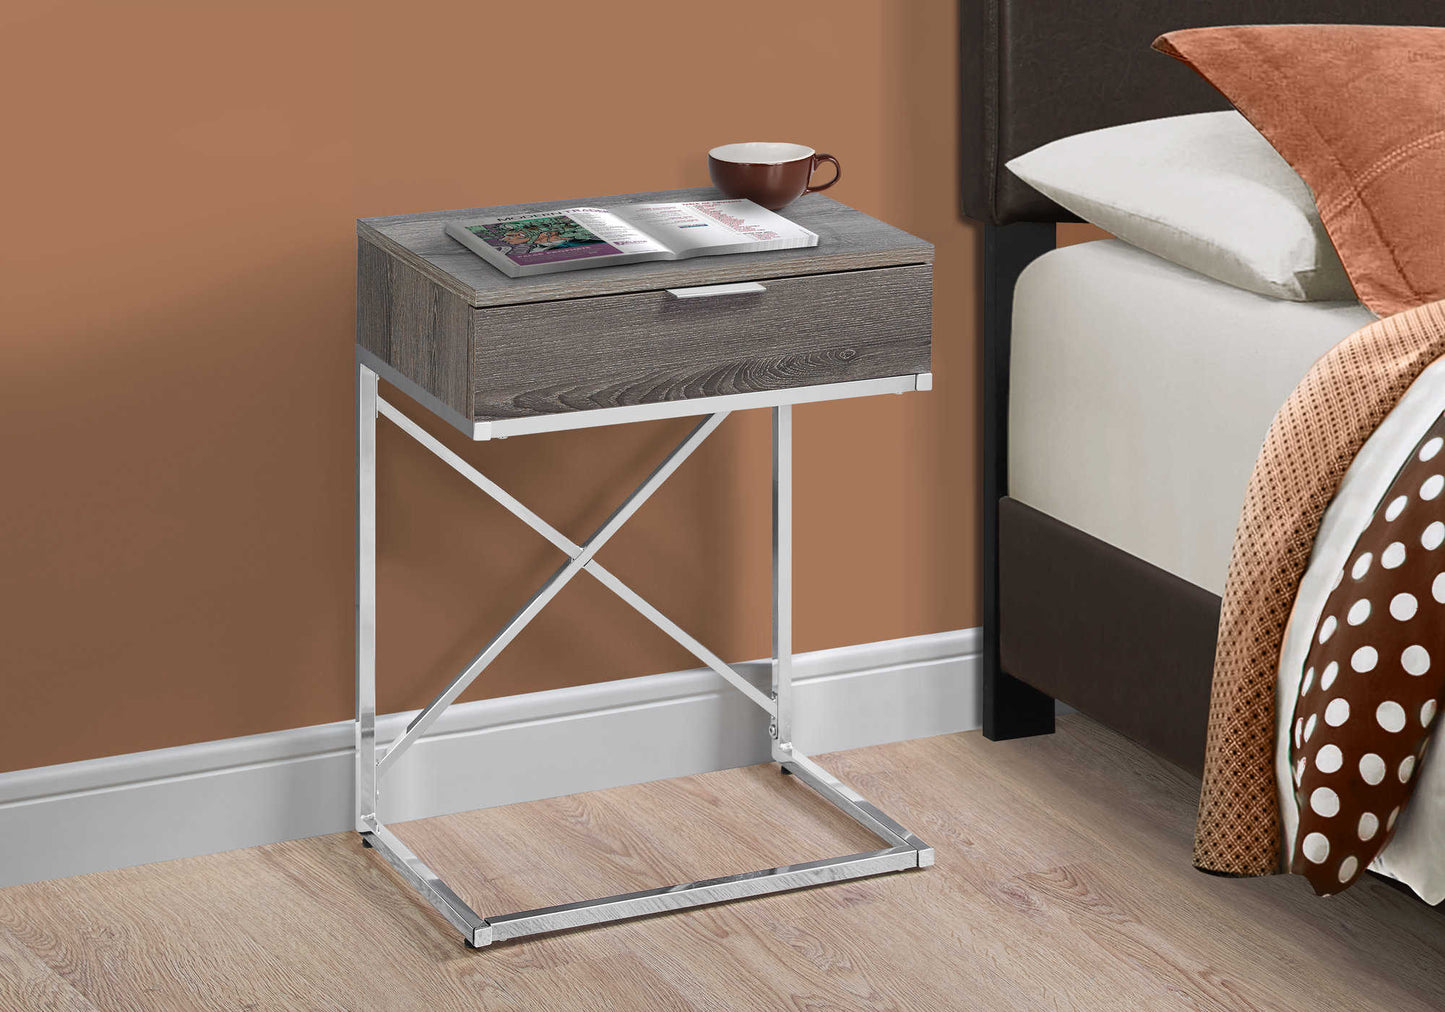 Contemporary 24"H Nightstand in Dark Taupe- Finish on Chrome Frame